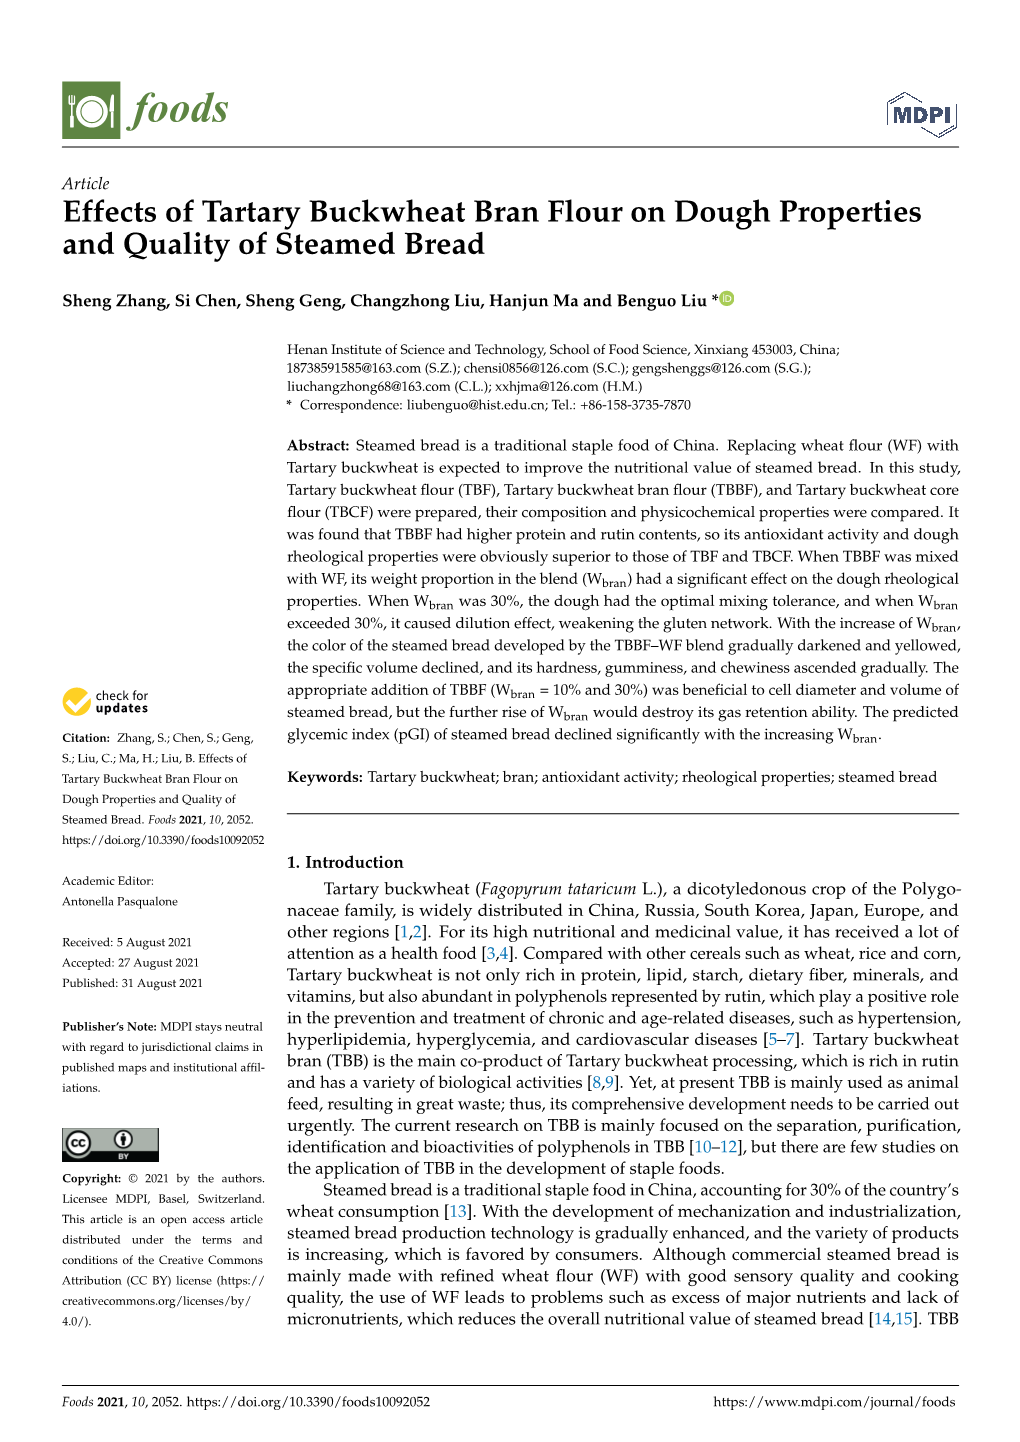 Effects of Tartary Buckwheat Bran Flour on Dough Properties and Quality of Steamed Bread